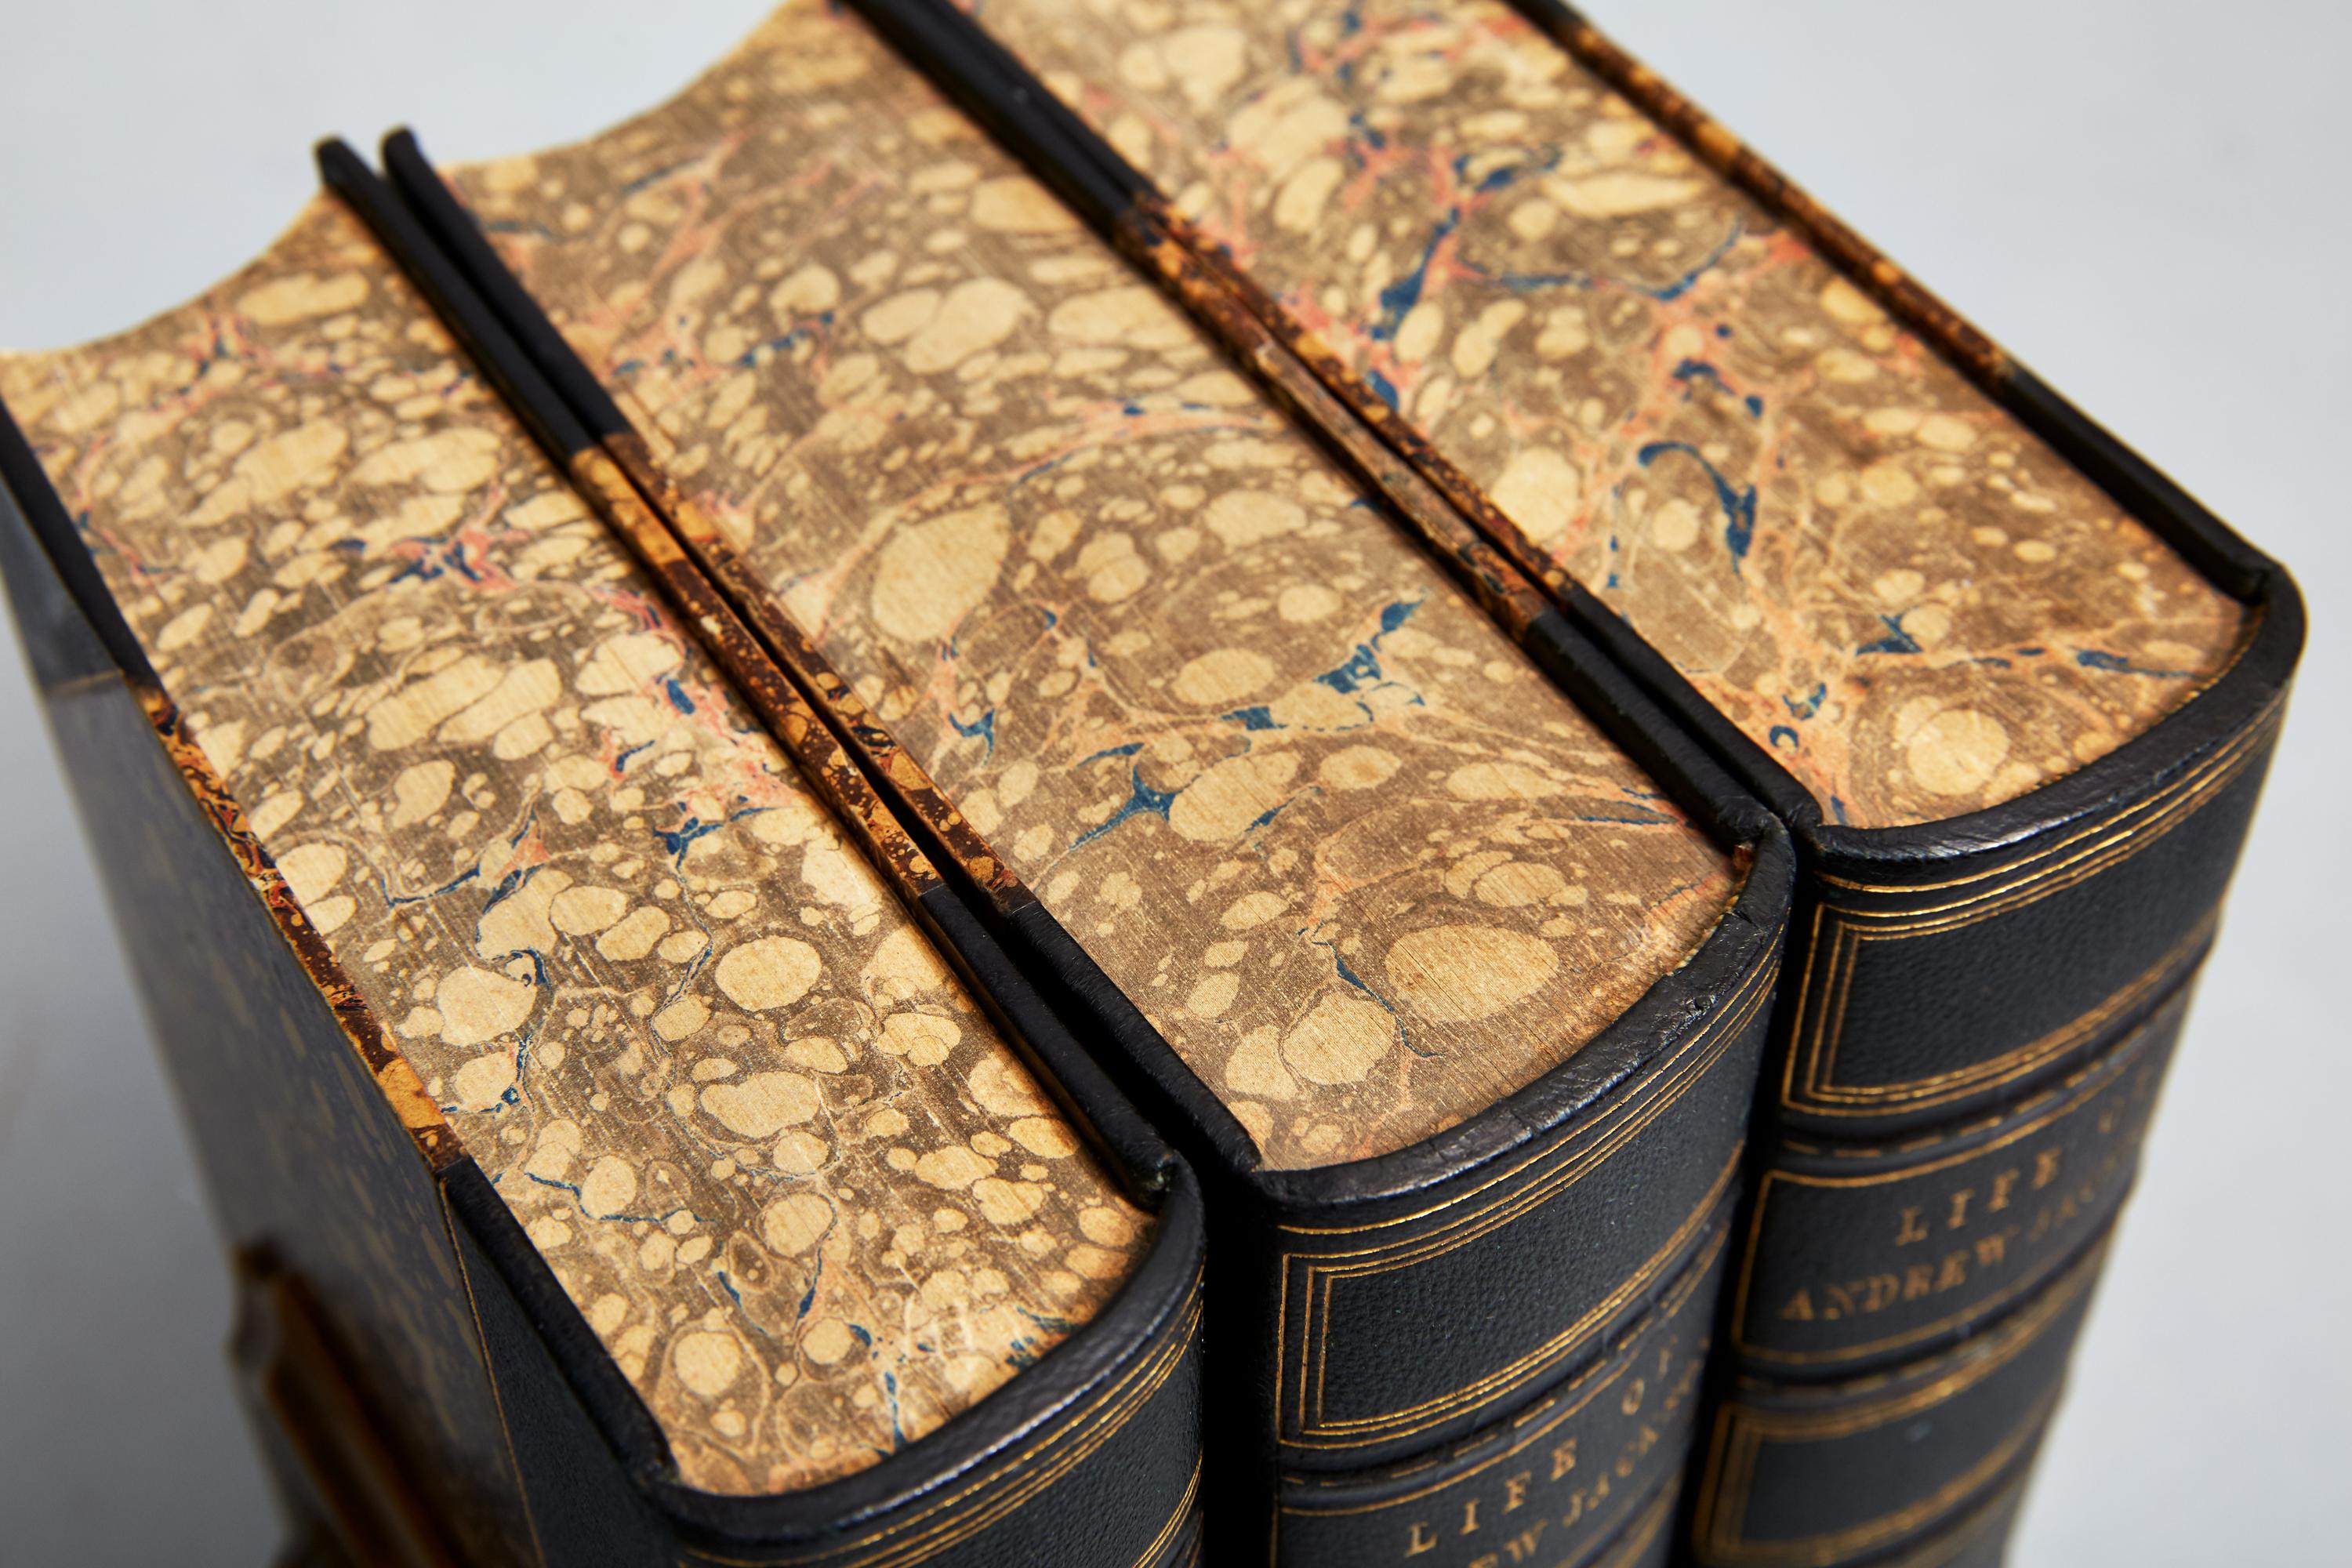 James Parton

3 volumes

Bound in 3/4 green morocco, marbled boards
And edges, raised bands, gilt panels, frontispiece in each volume

Published: New York
Mason Brothers, 1860 & 1864.